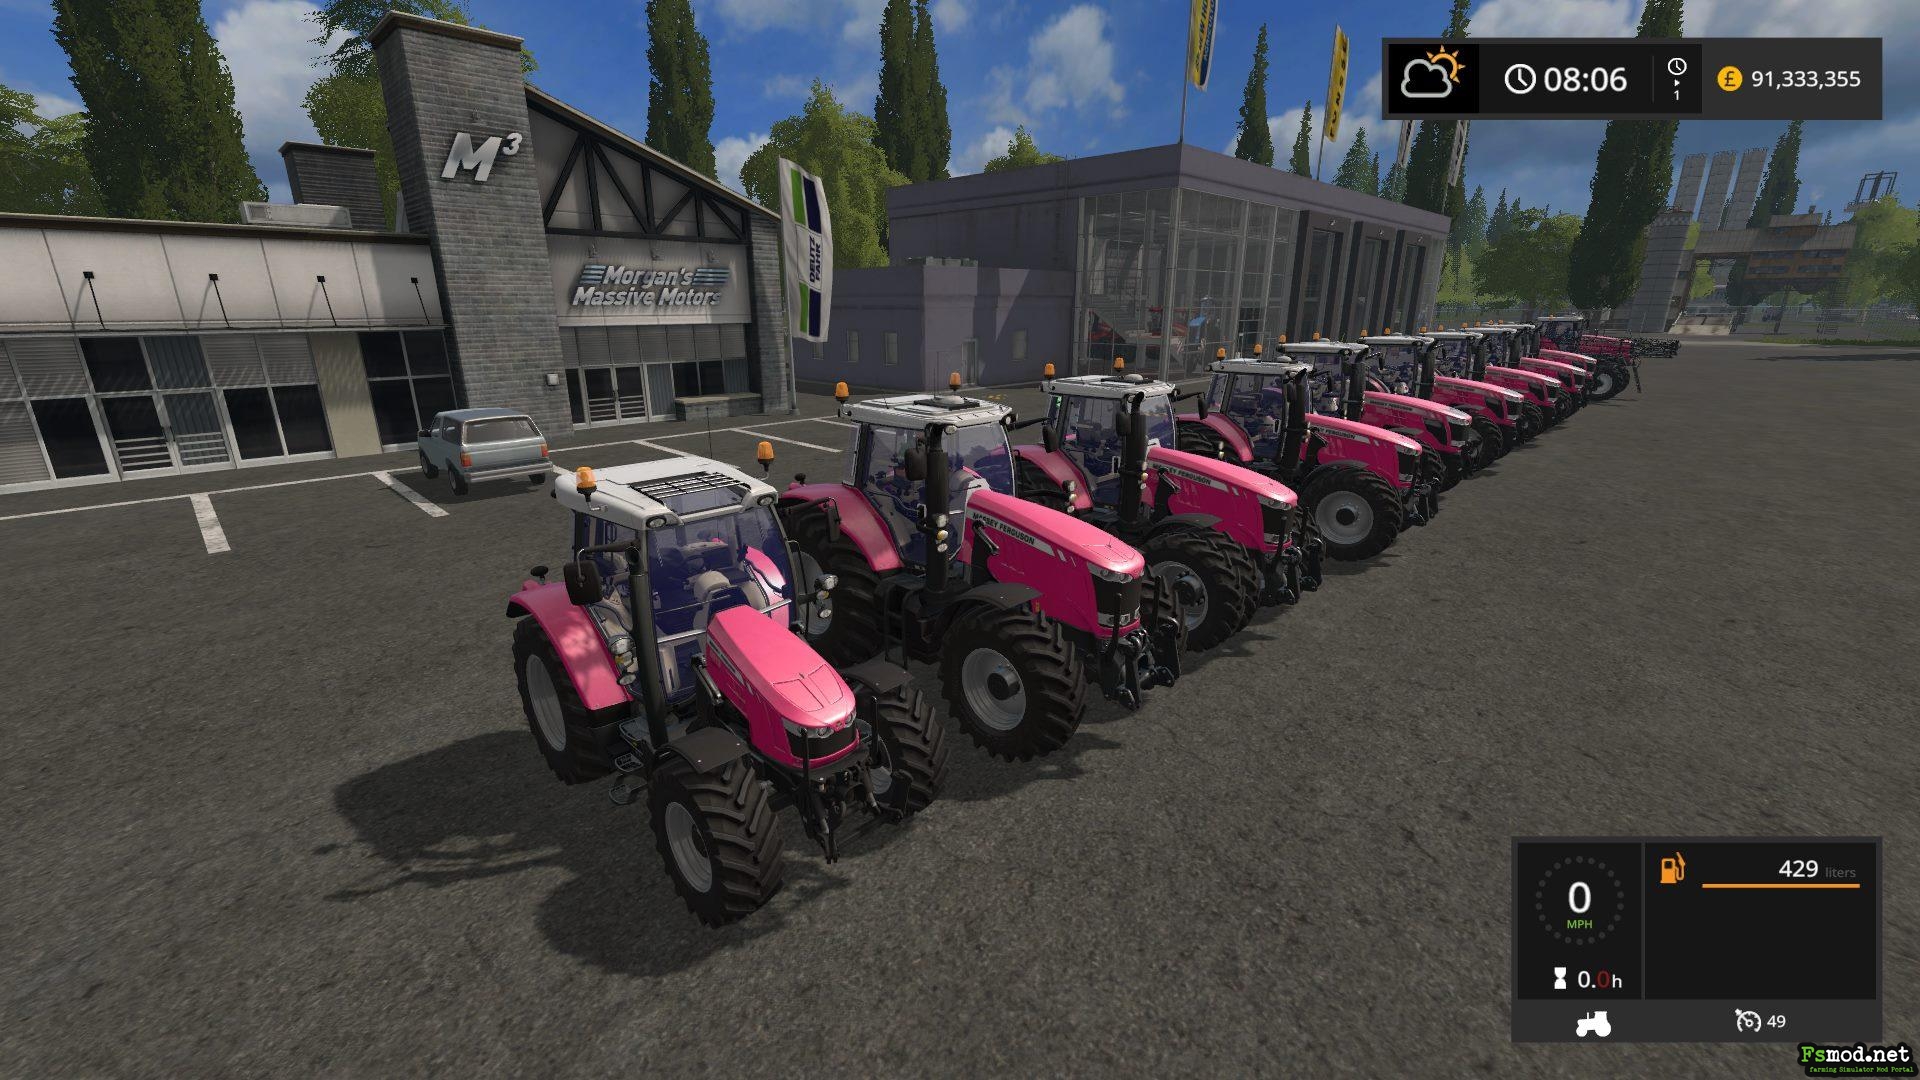 FS17 - Mf Update With Race for Life Pink V1.0